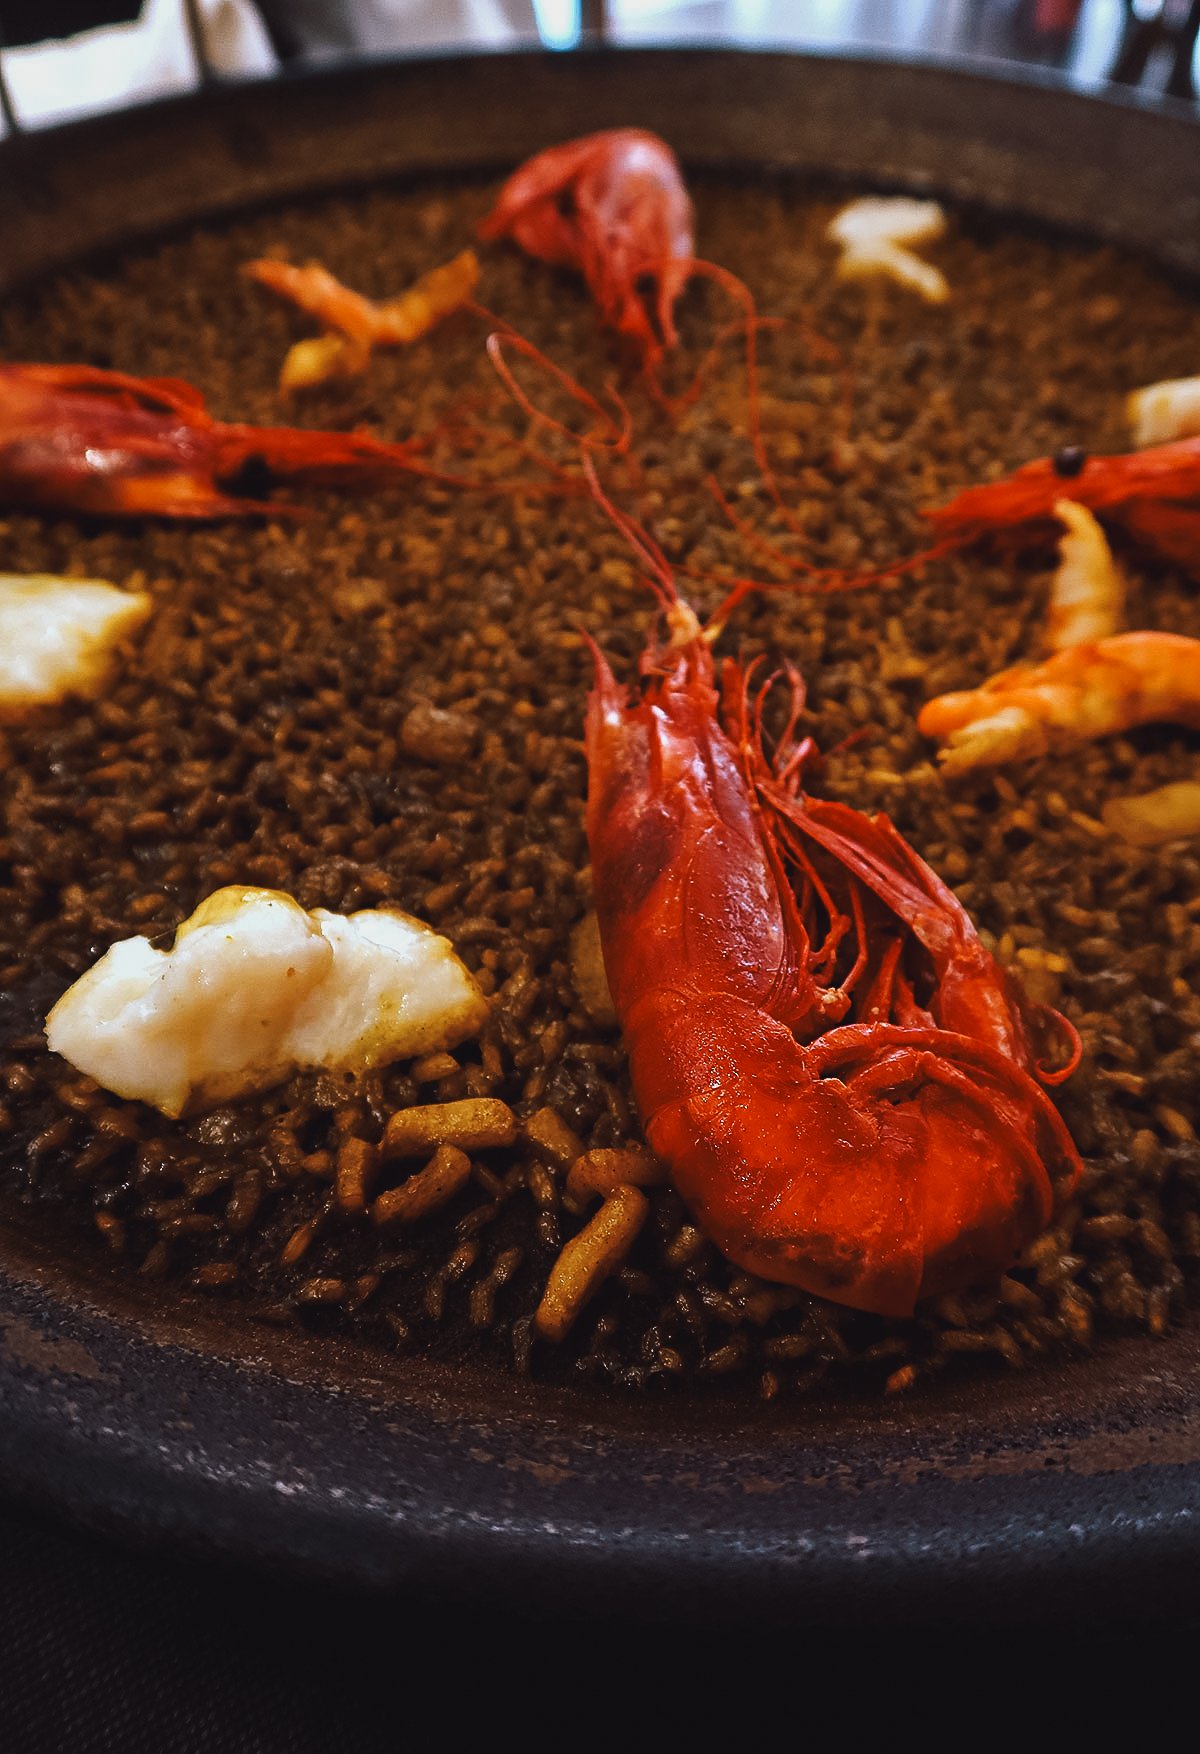 Seafood paella with scarlet prawns at a restaurant in Valencia